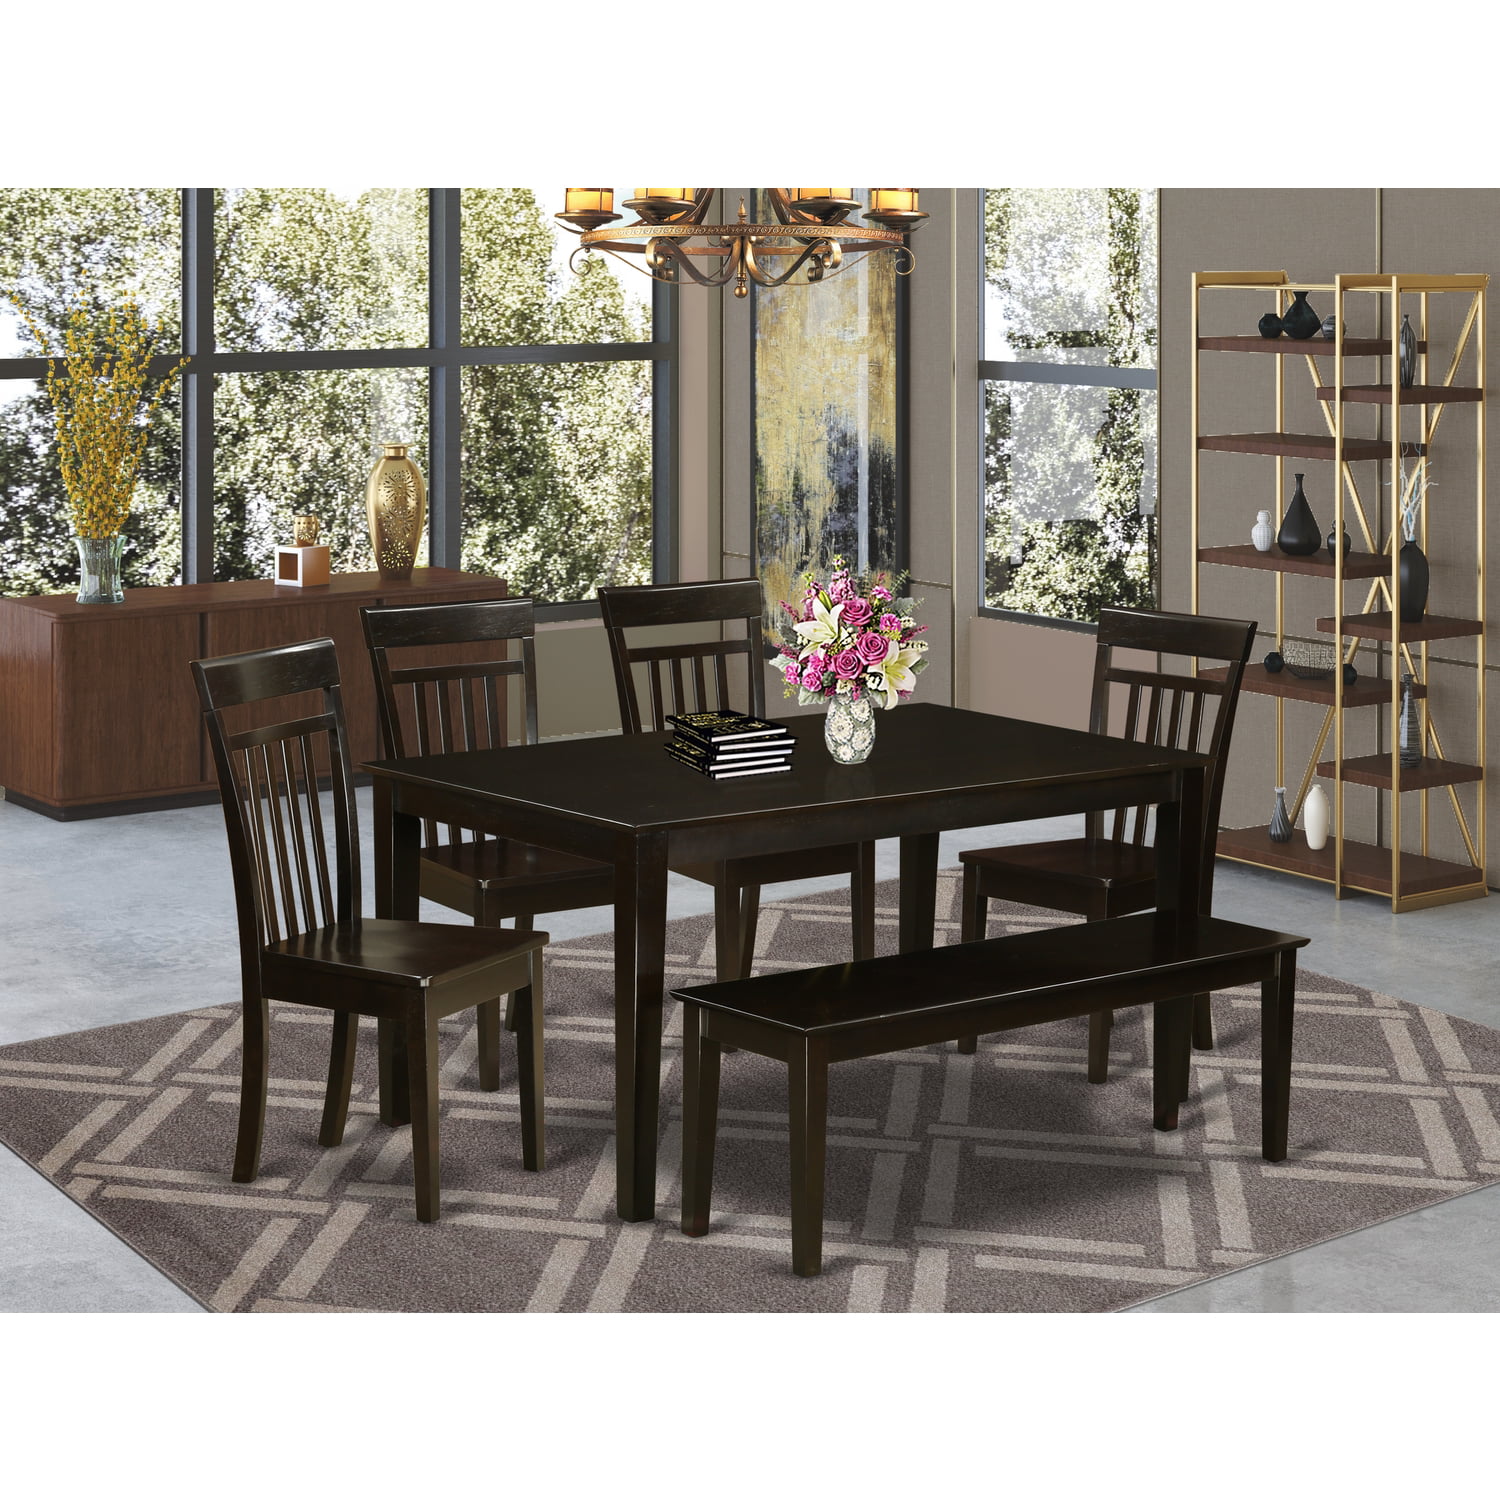 Kitchen Table With Bench SetKitchen Table And 4 Chairs For Kitchen And